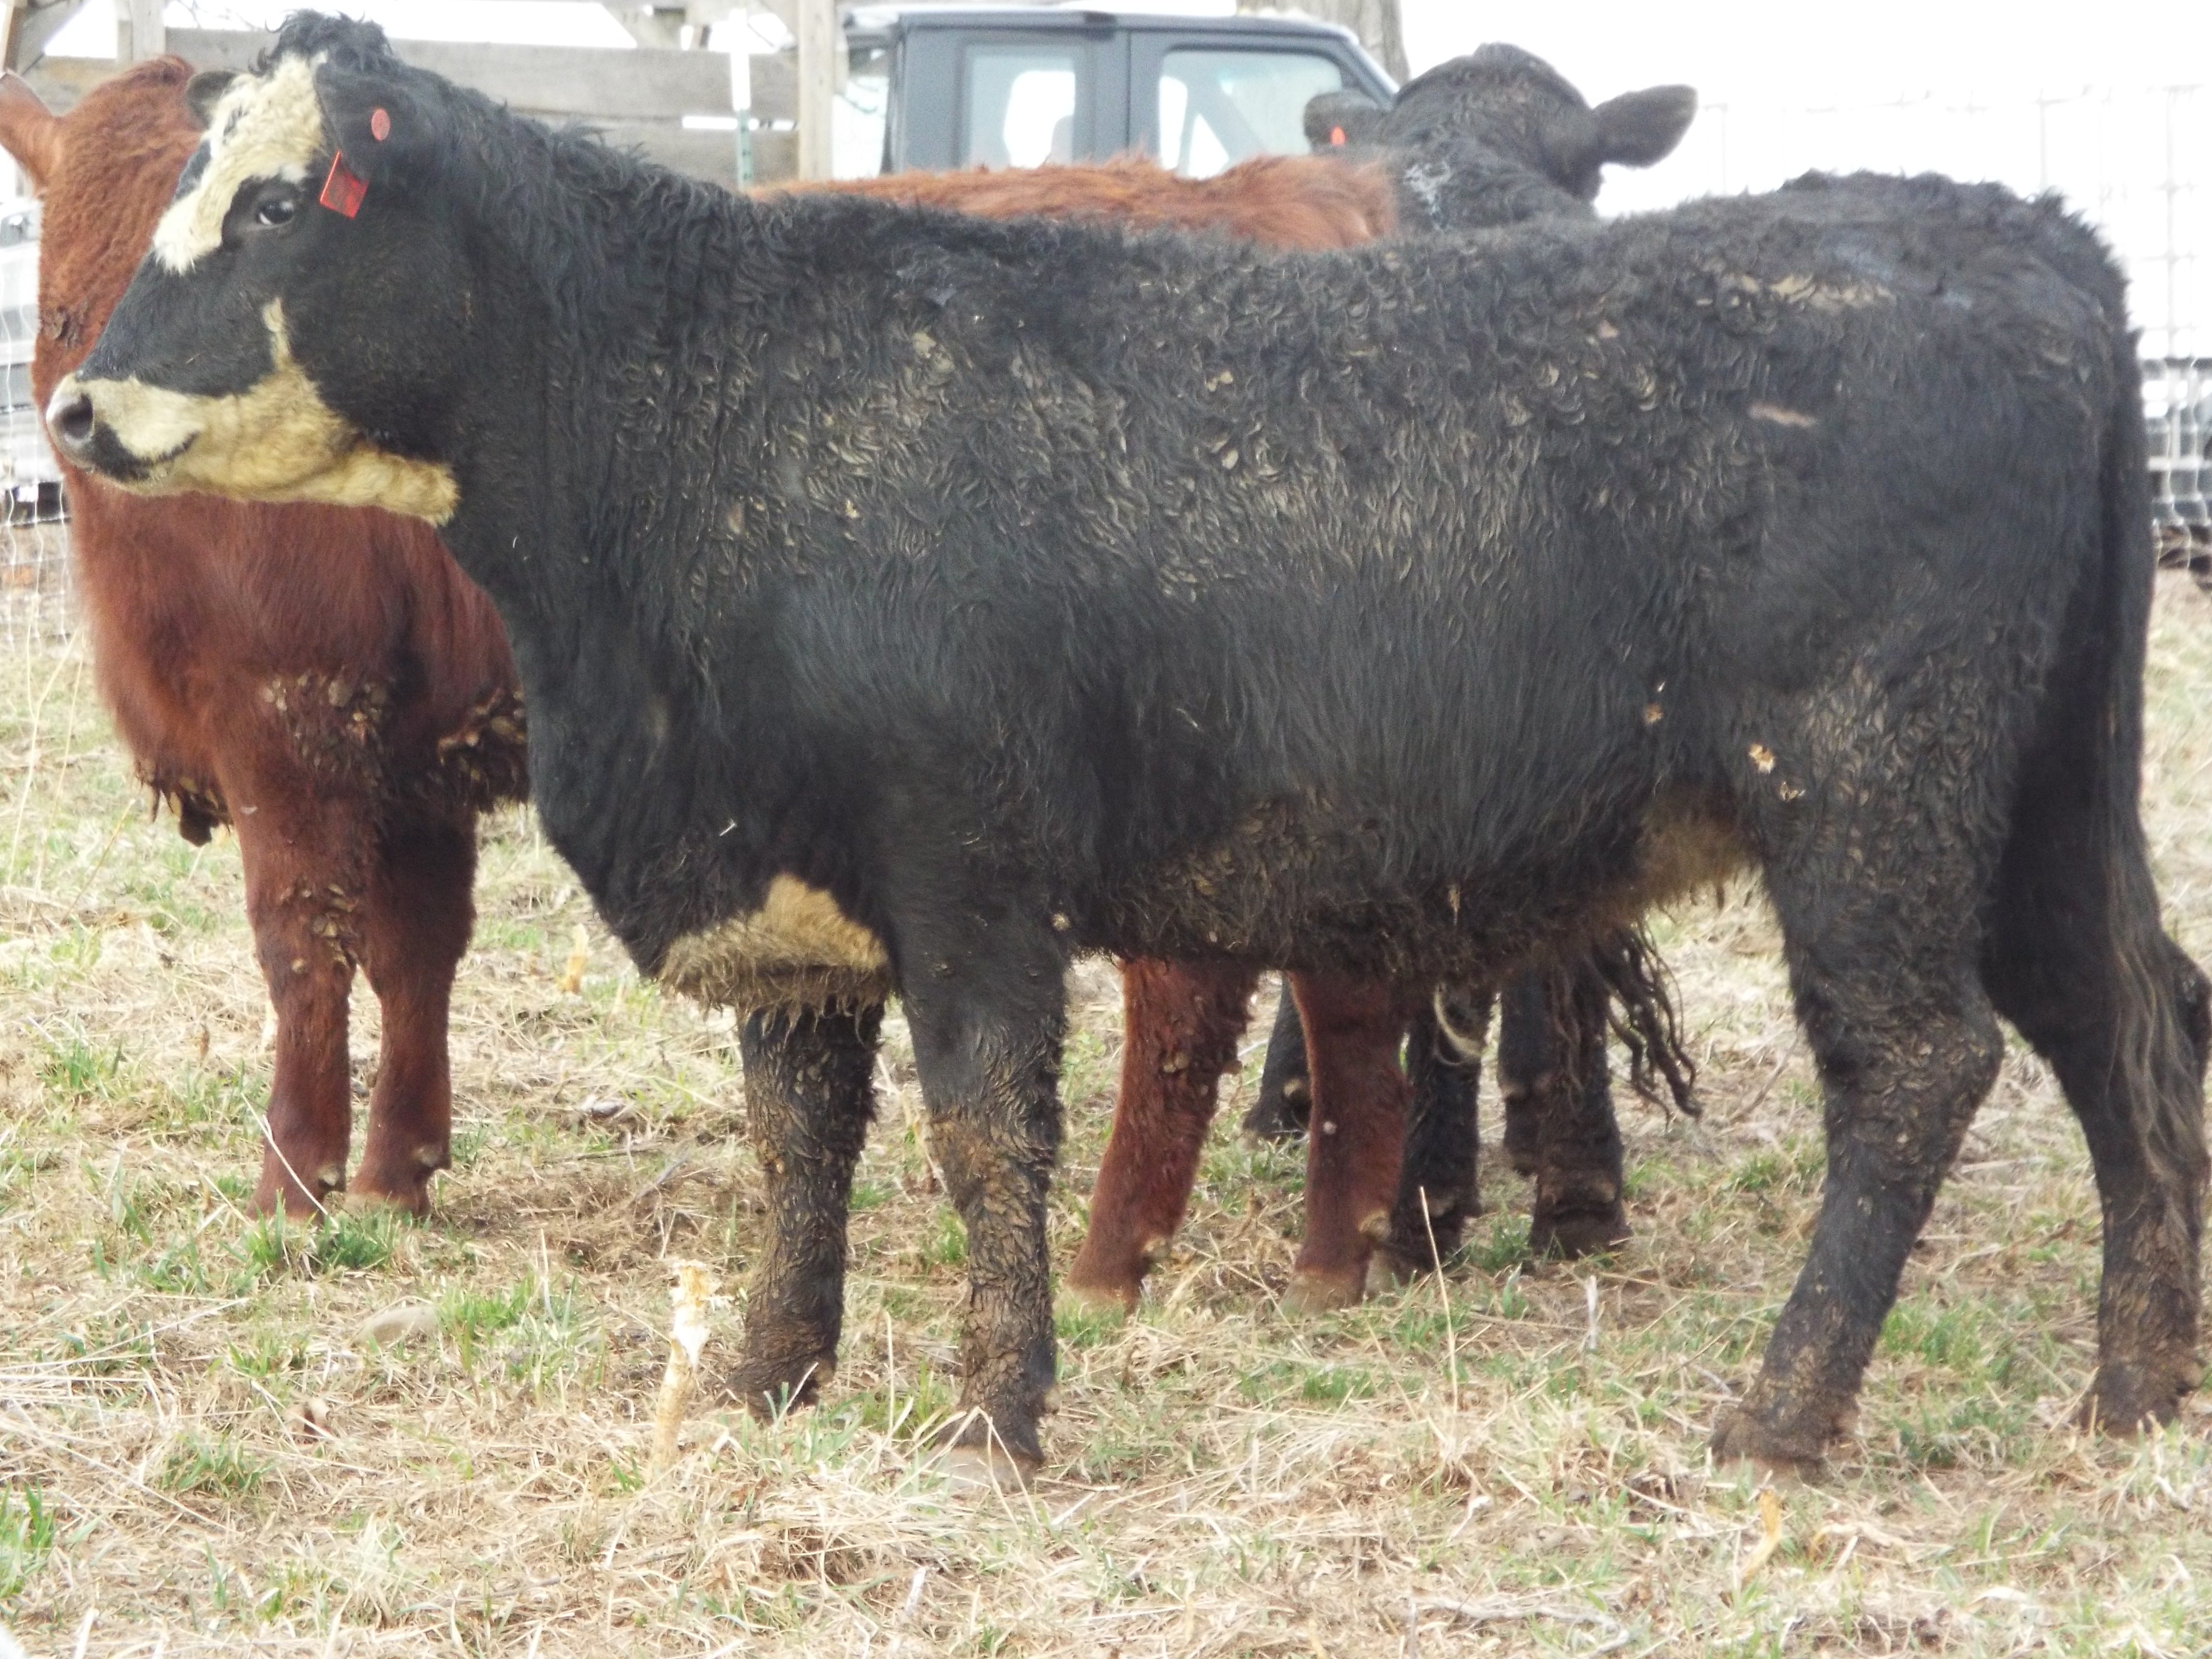 These heifers are an Angus Devon cross, but in this one, you can see a Hereford great grandmother.